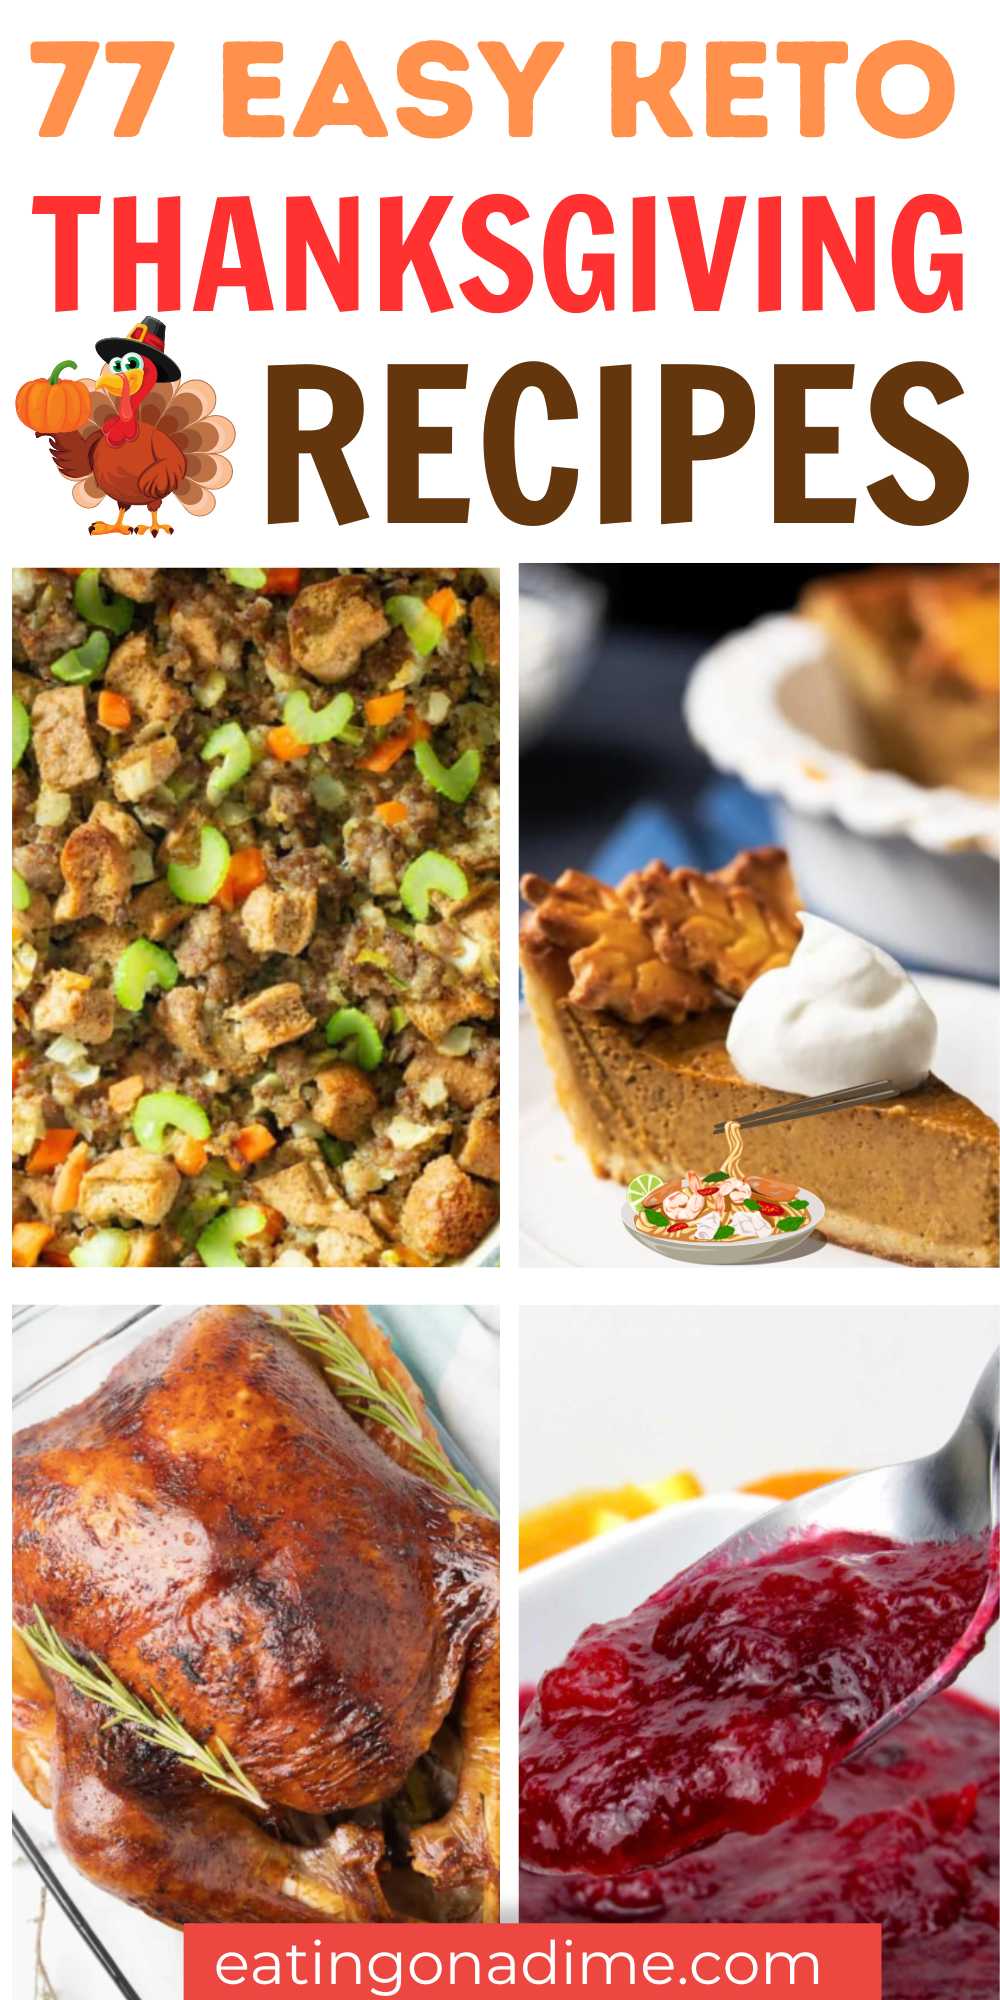 Looking to spice up your Thanksgiving feast? Say hello to Keto Thanksgiving recipes, where flavor meets low-carb goodness. Discover mouth-watering healthy Thanksgiving recipes that will keep you in ketosis while indulging in the holiday spirit. #eatingonadime #ketothanksgivingrecipes #ketorecipes